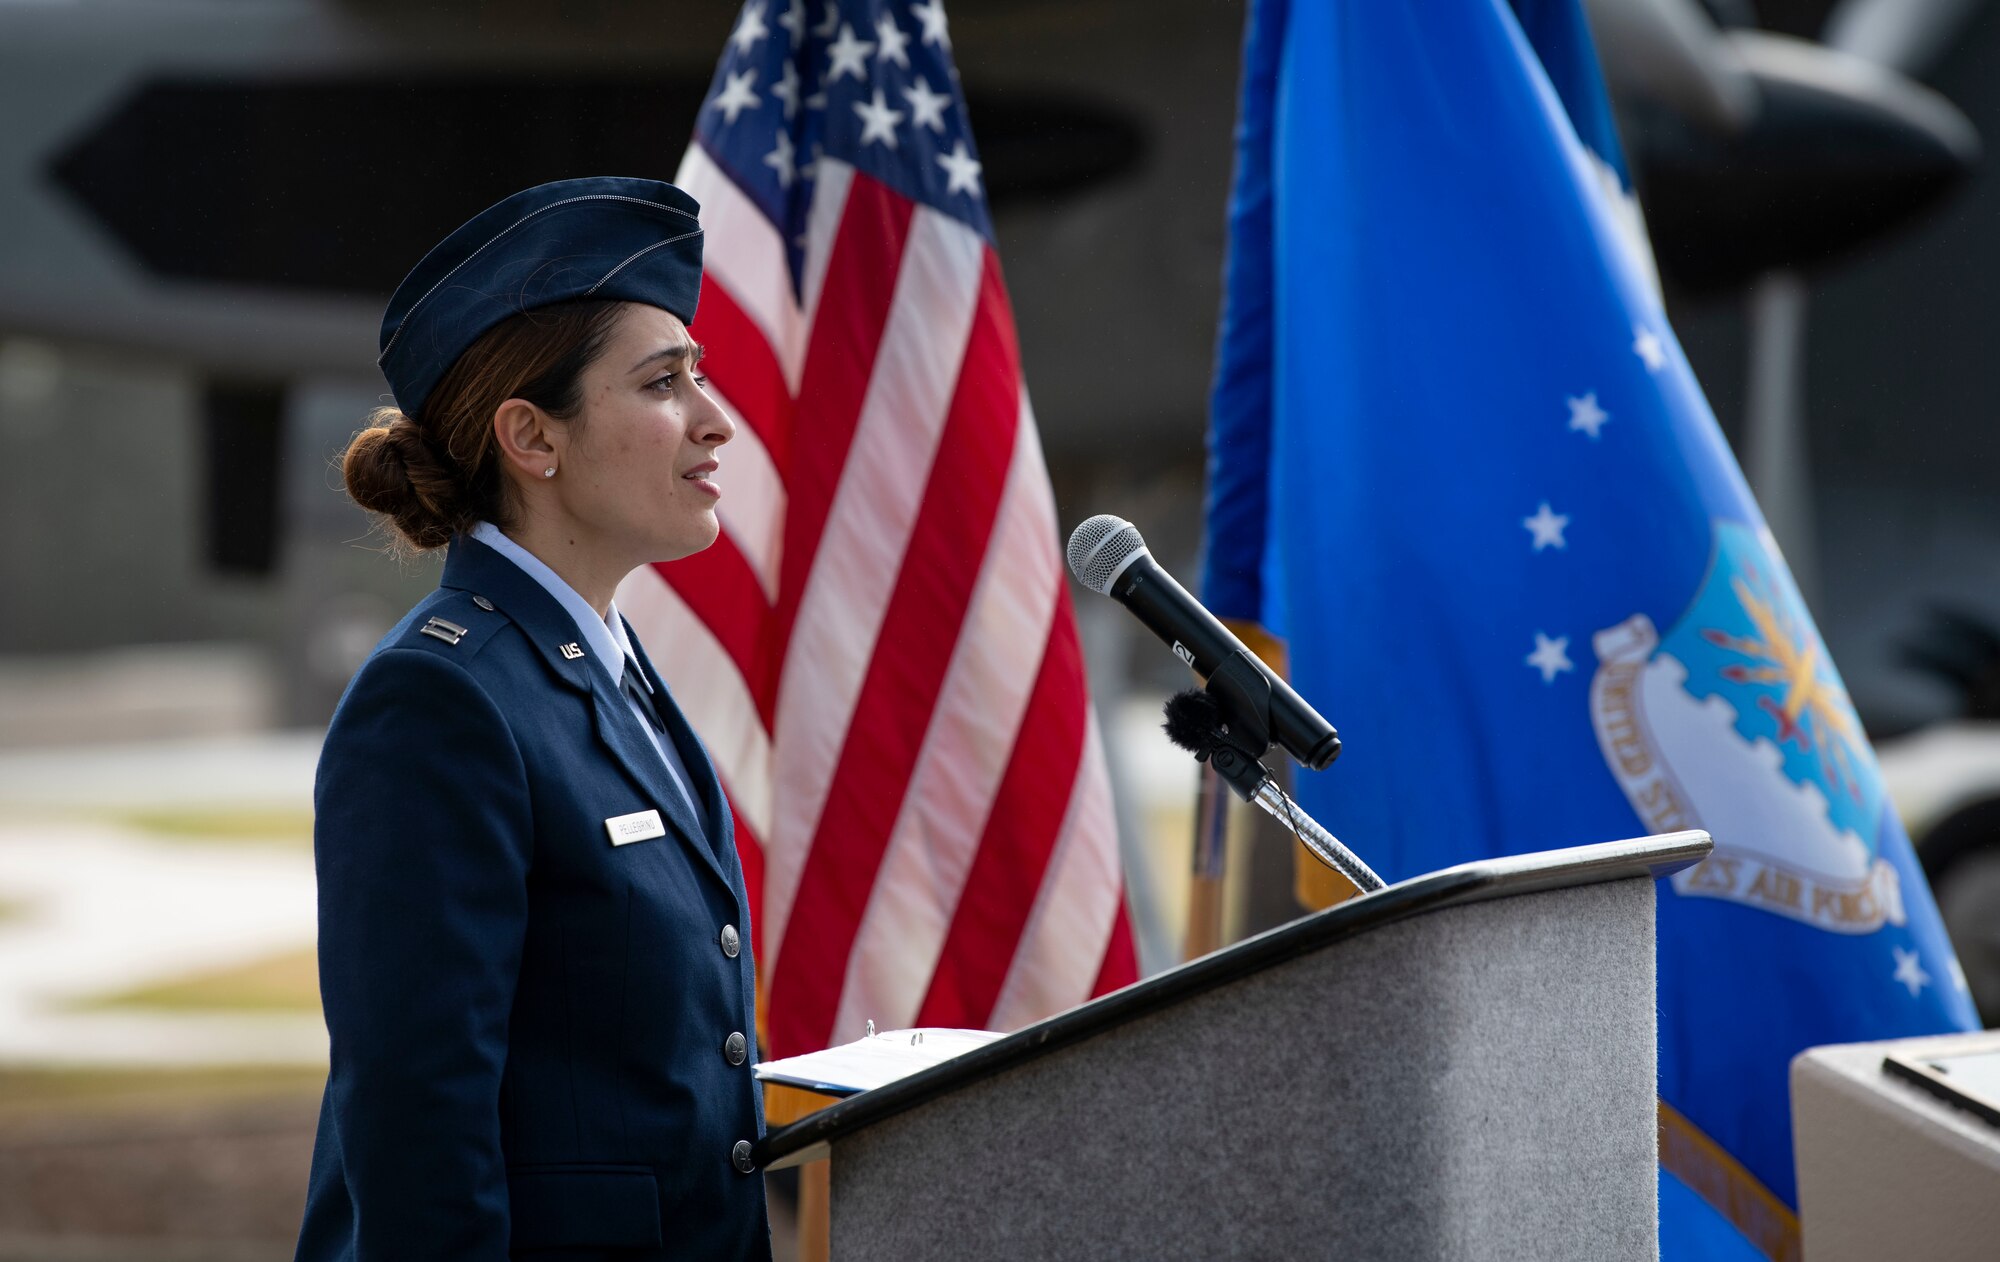 U.S. Air Force Capt. Cristina Pellegrino, 319th Special Operations Squadron, sings the National Anthem during a memorial ceremony at Hurlburt Field, Florida, Feb. 17, 2022.